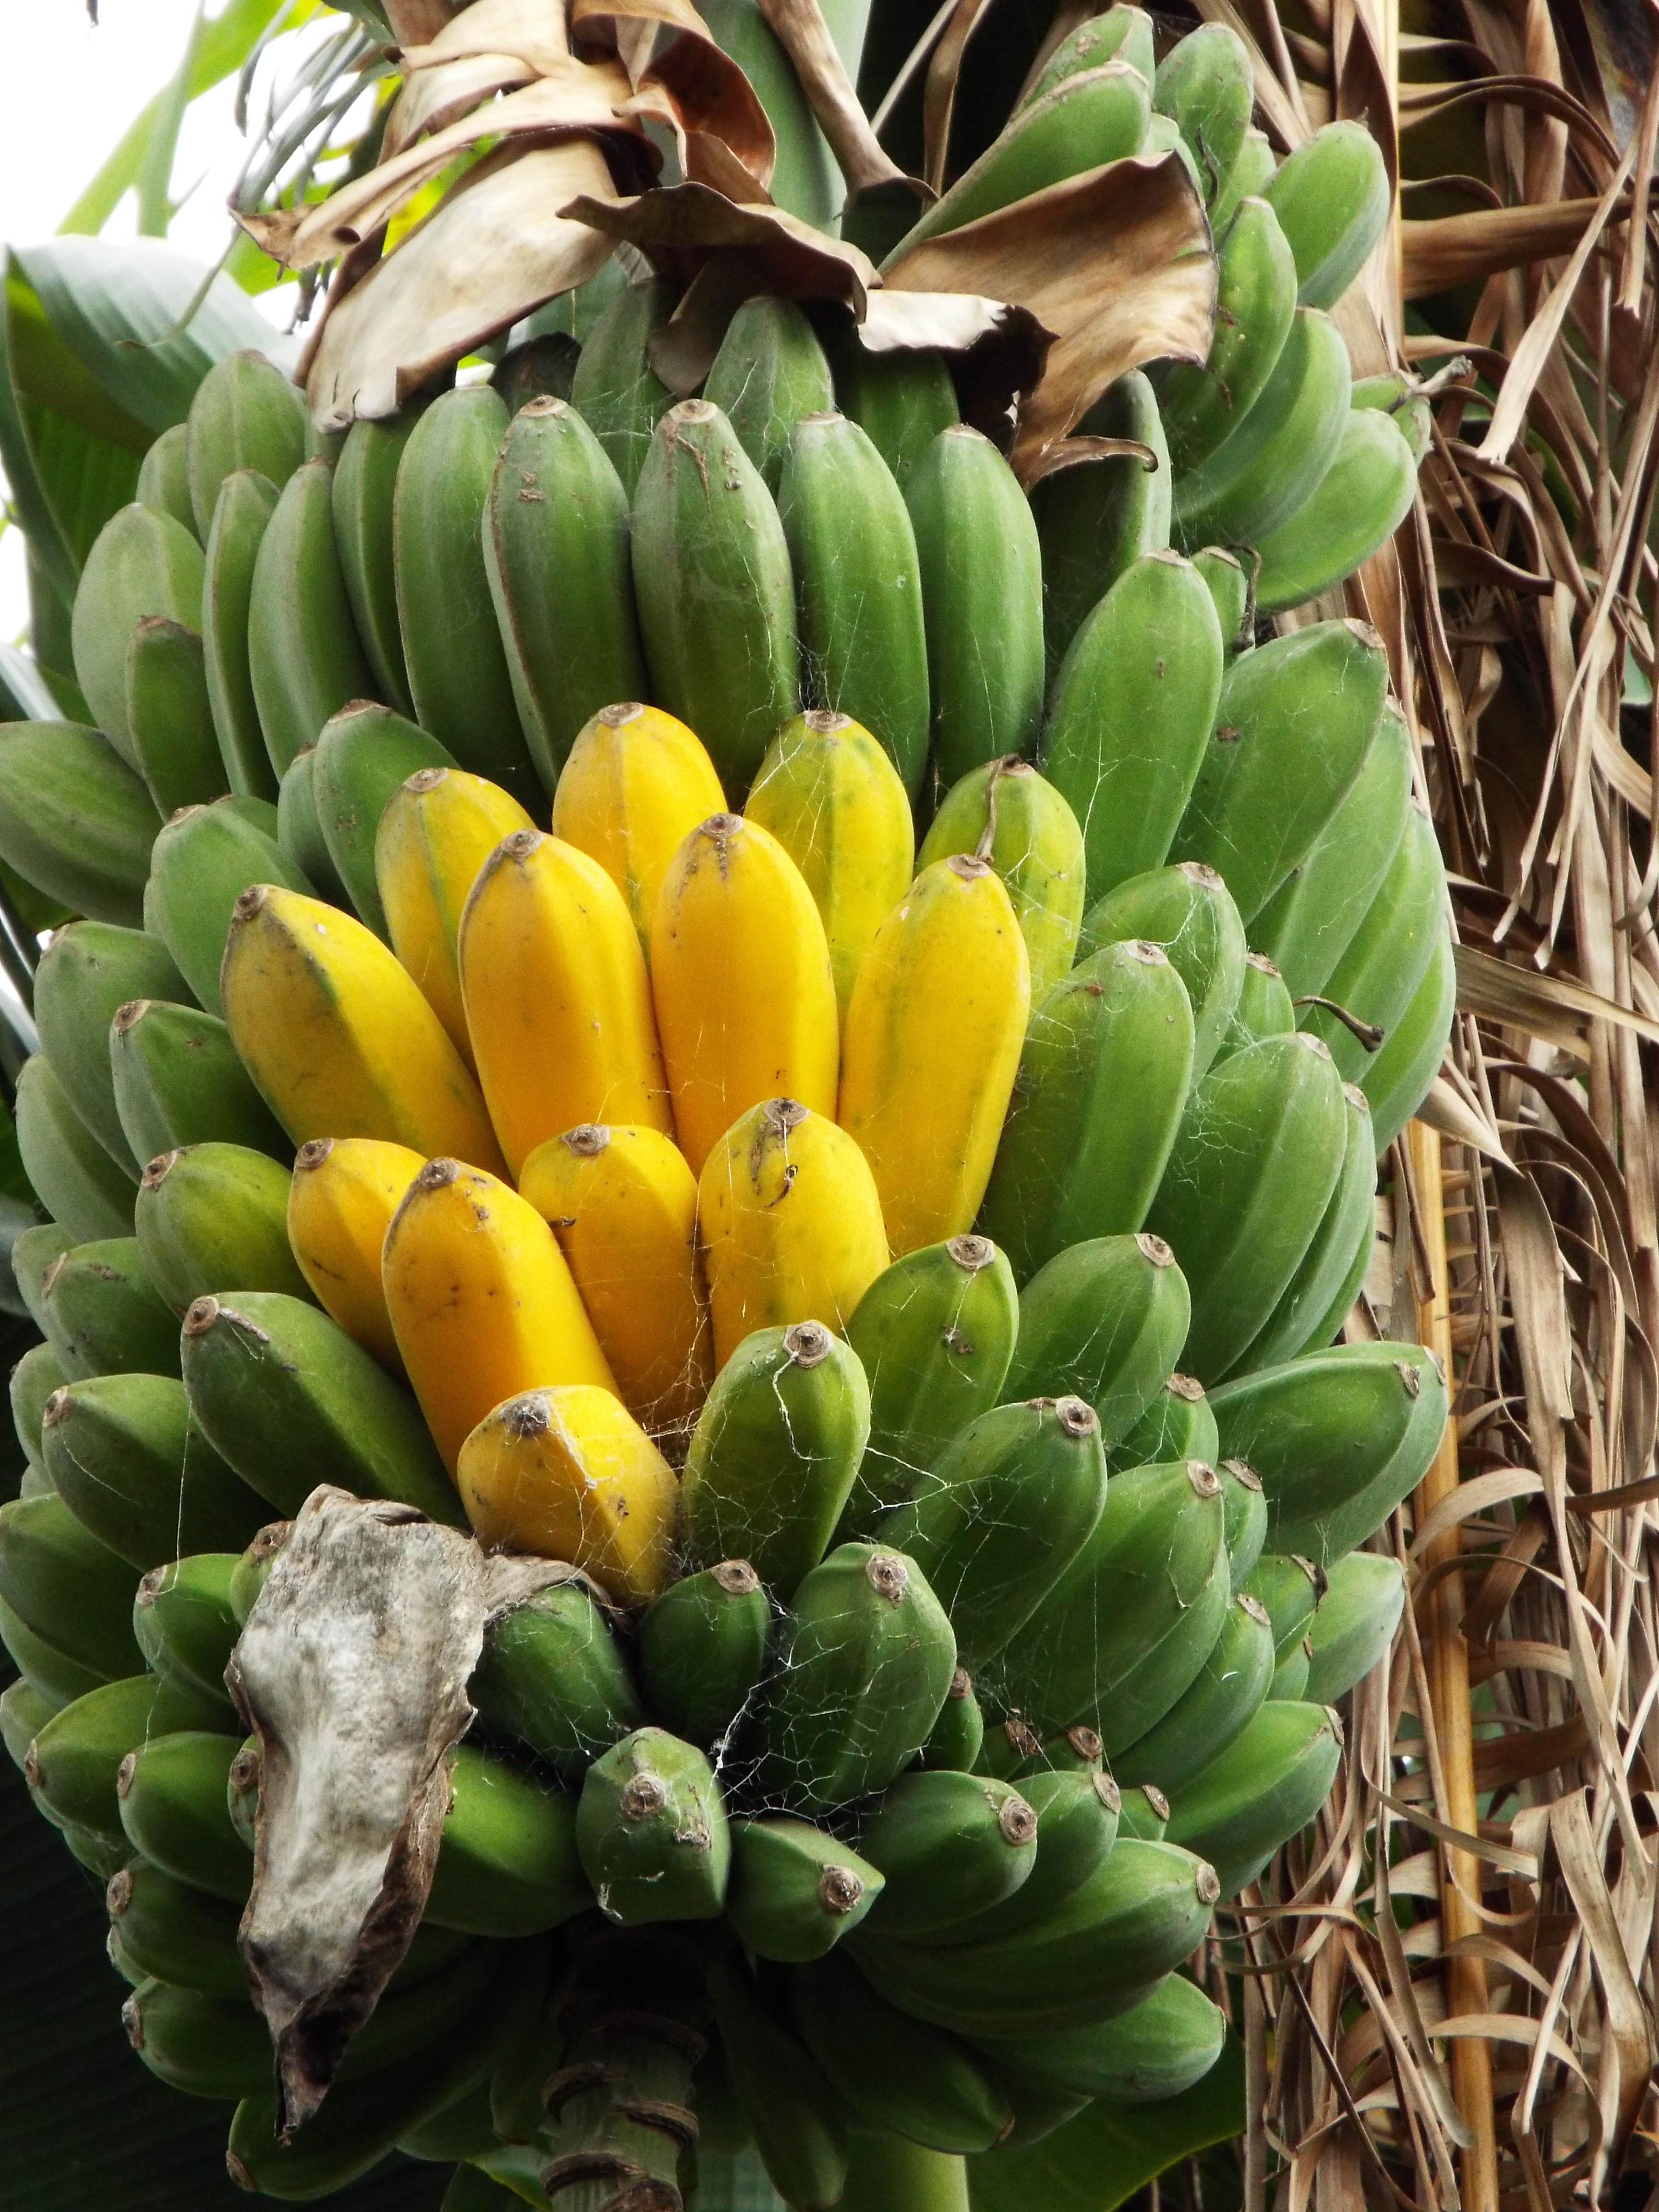 A bunch of tightly clustered, ripening bananas. The bananas in the middle of the cluster are yellow and ripe.